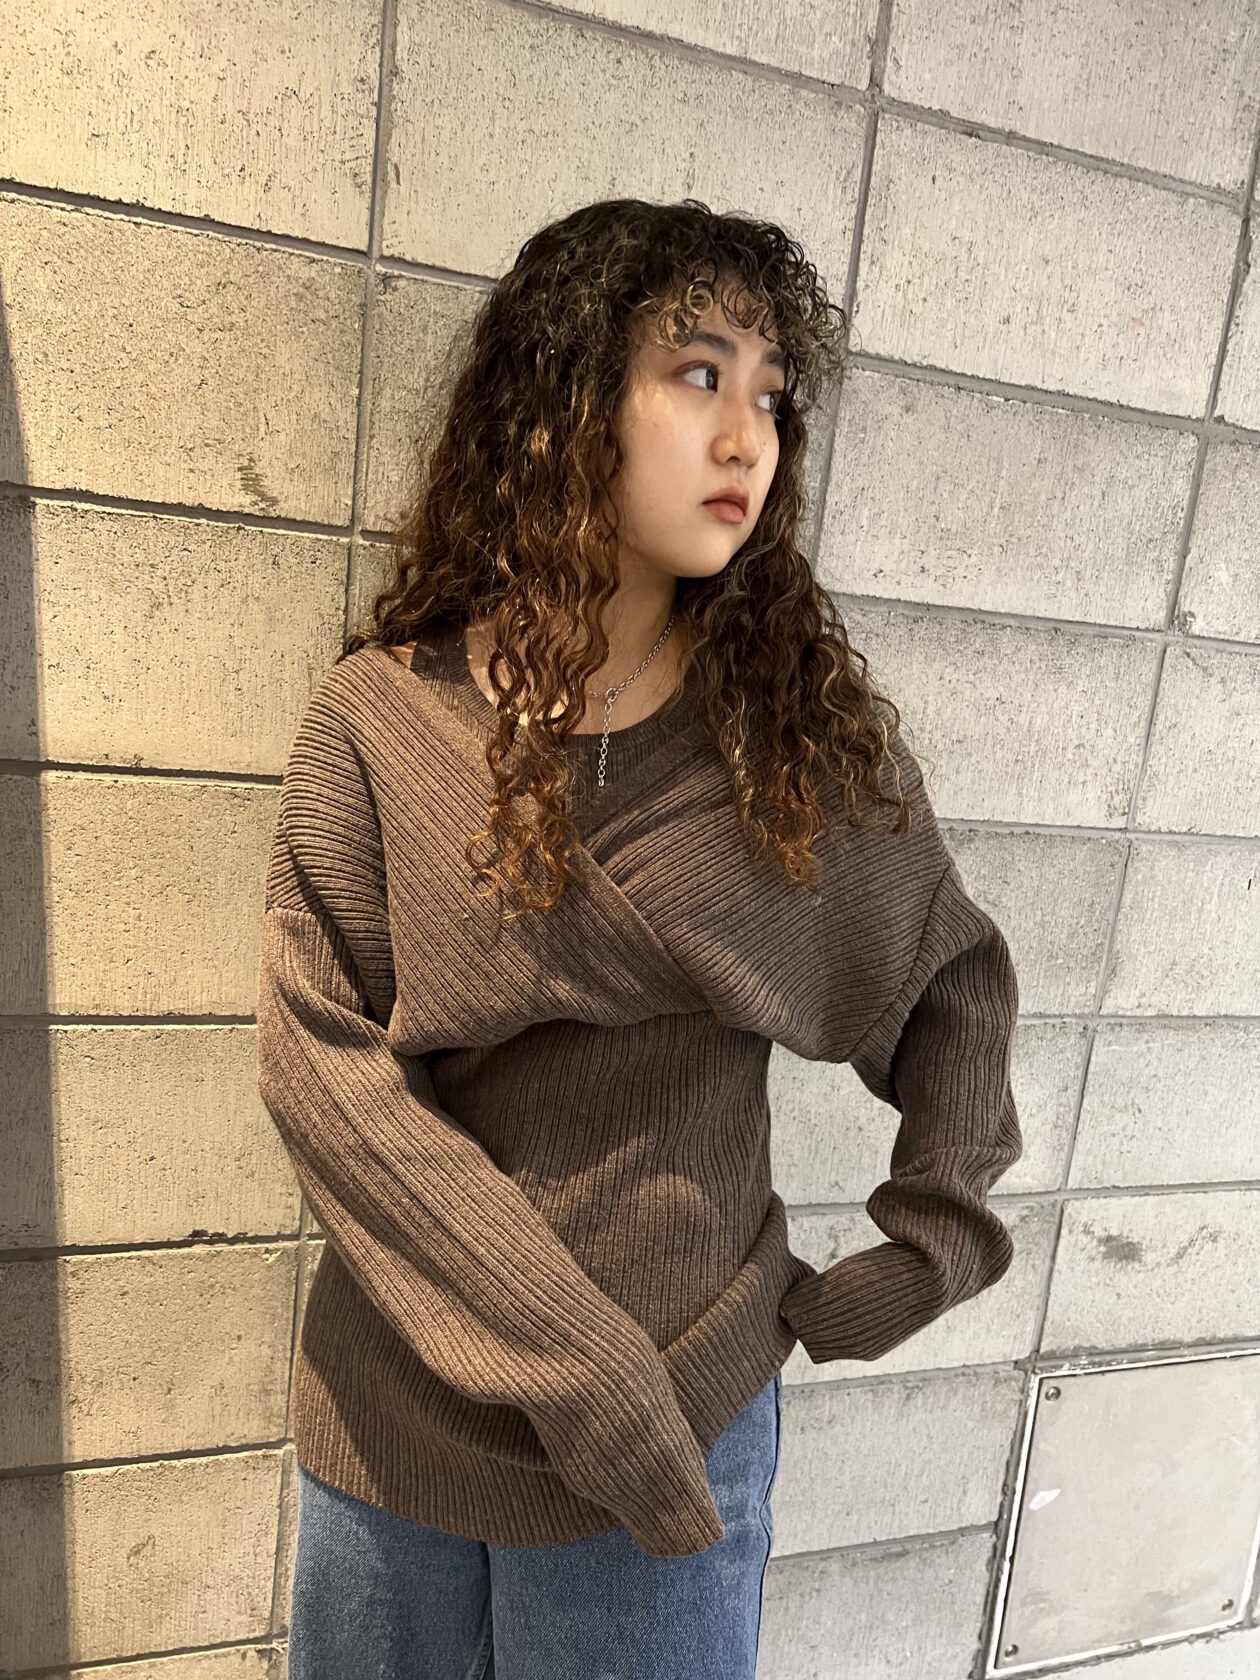 CLANE CACHE COEUR LAYER KNIT TOPS